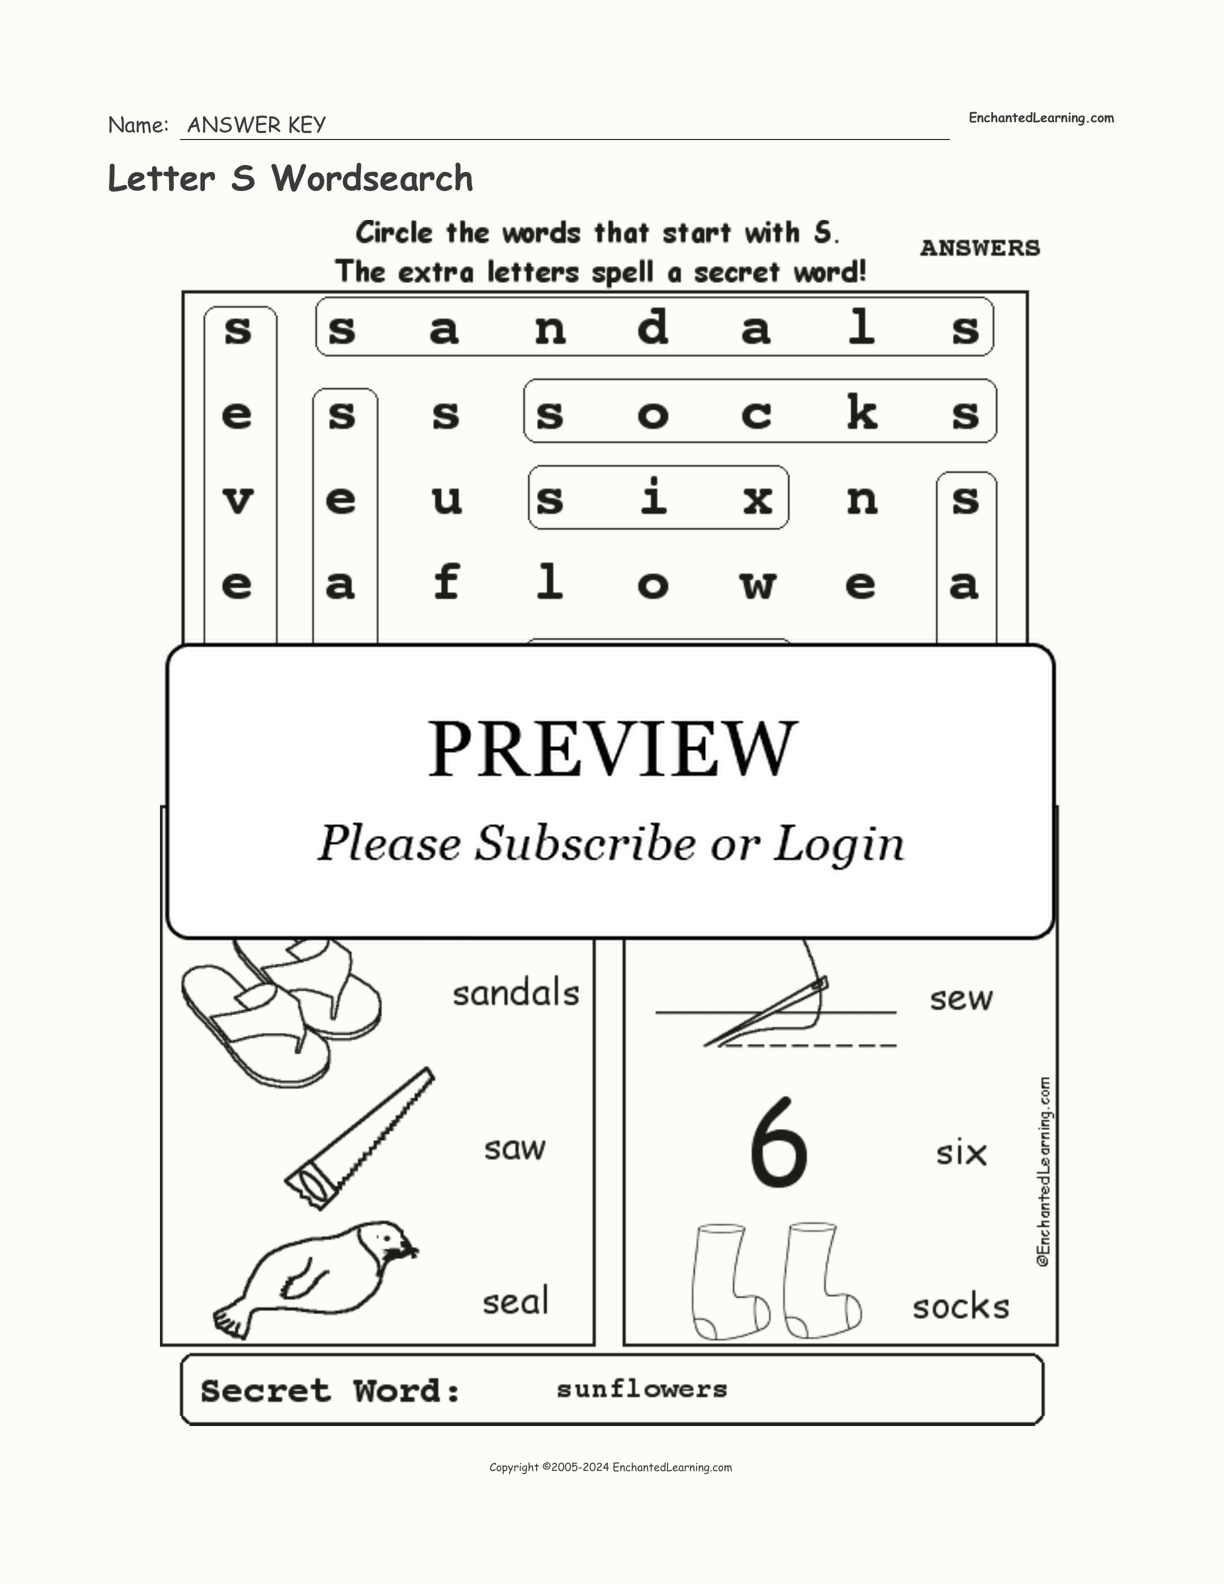 Letter S Wordsearch interactive worksheet page 2